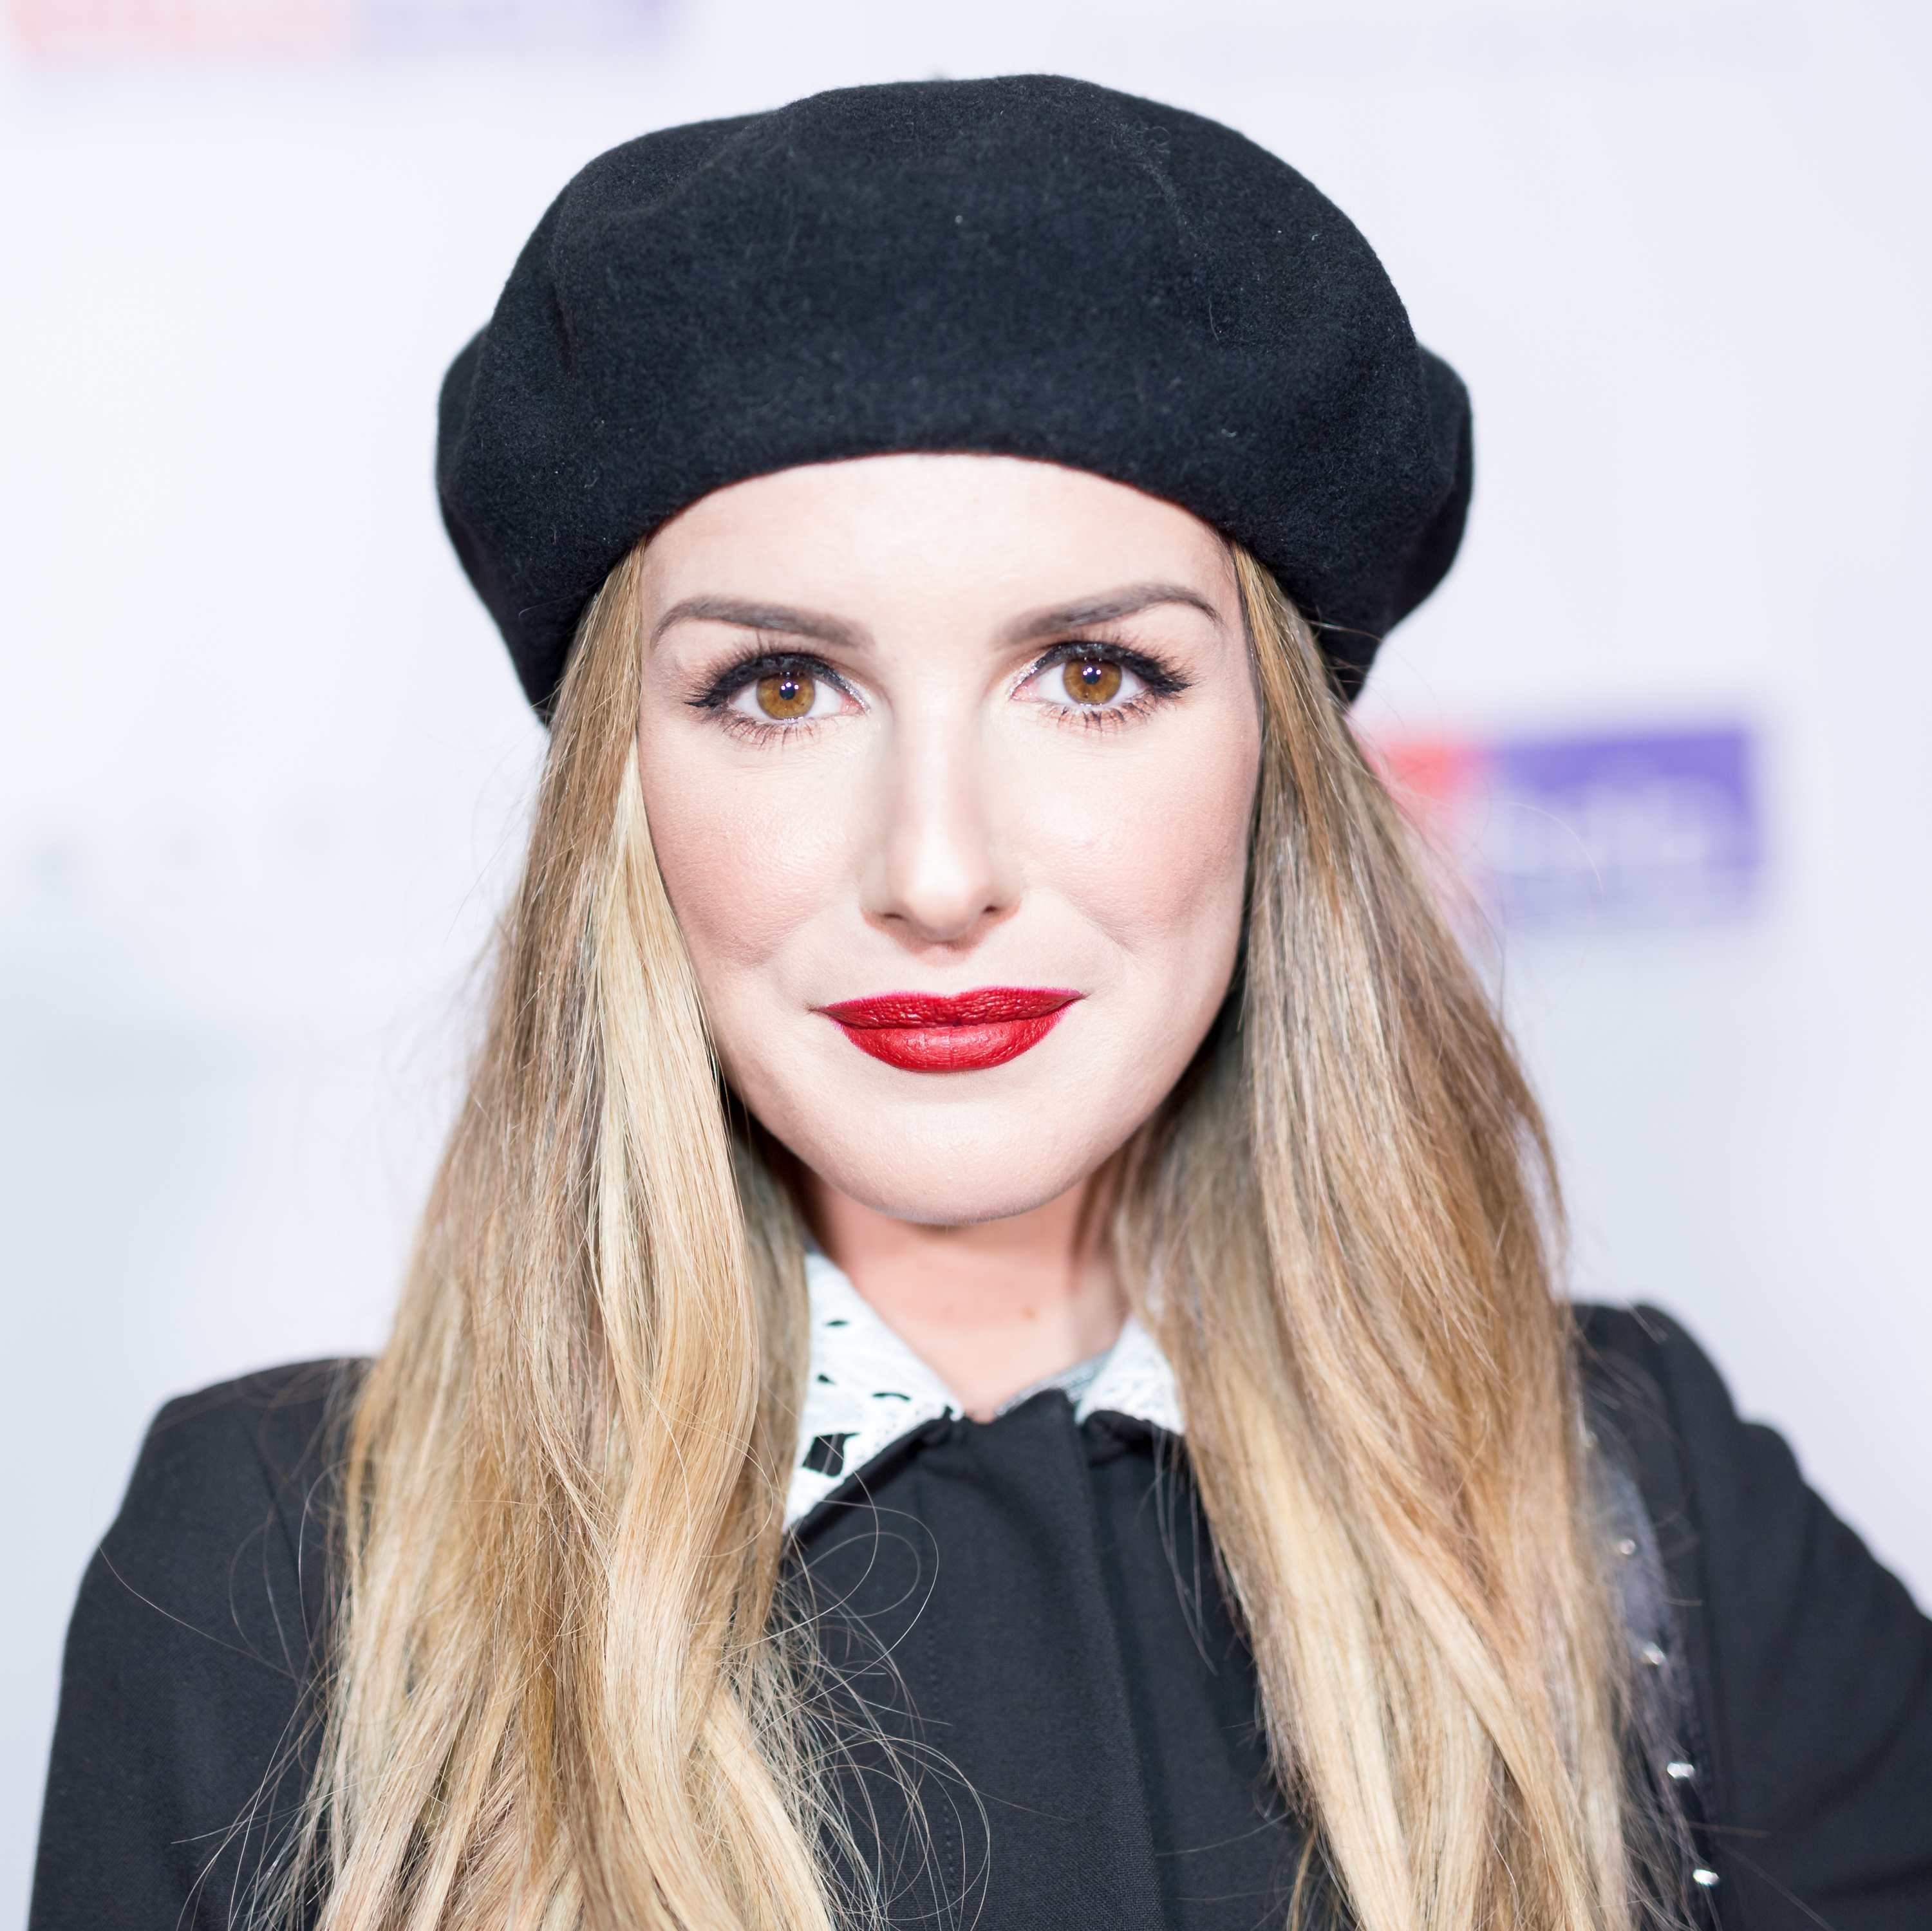 A closeup of Shenae at an event with long hair and wearing a beret